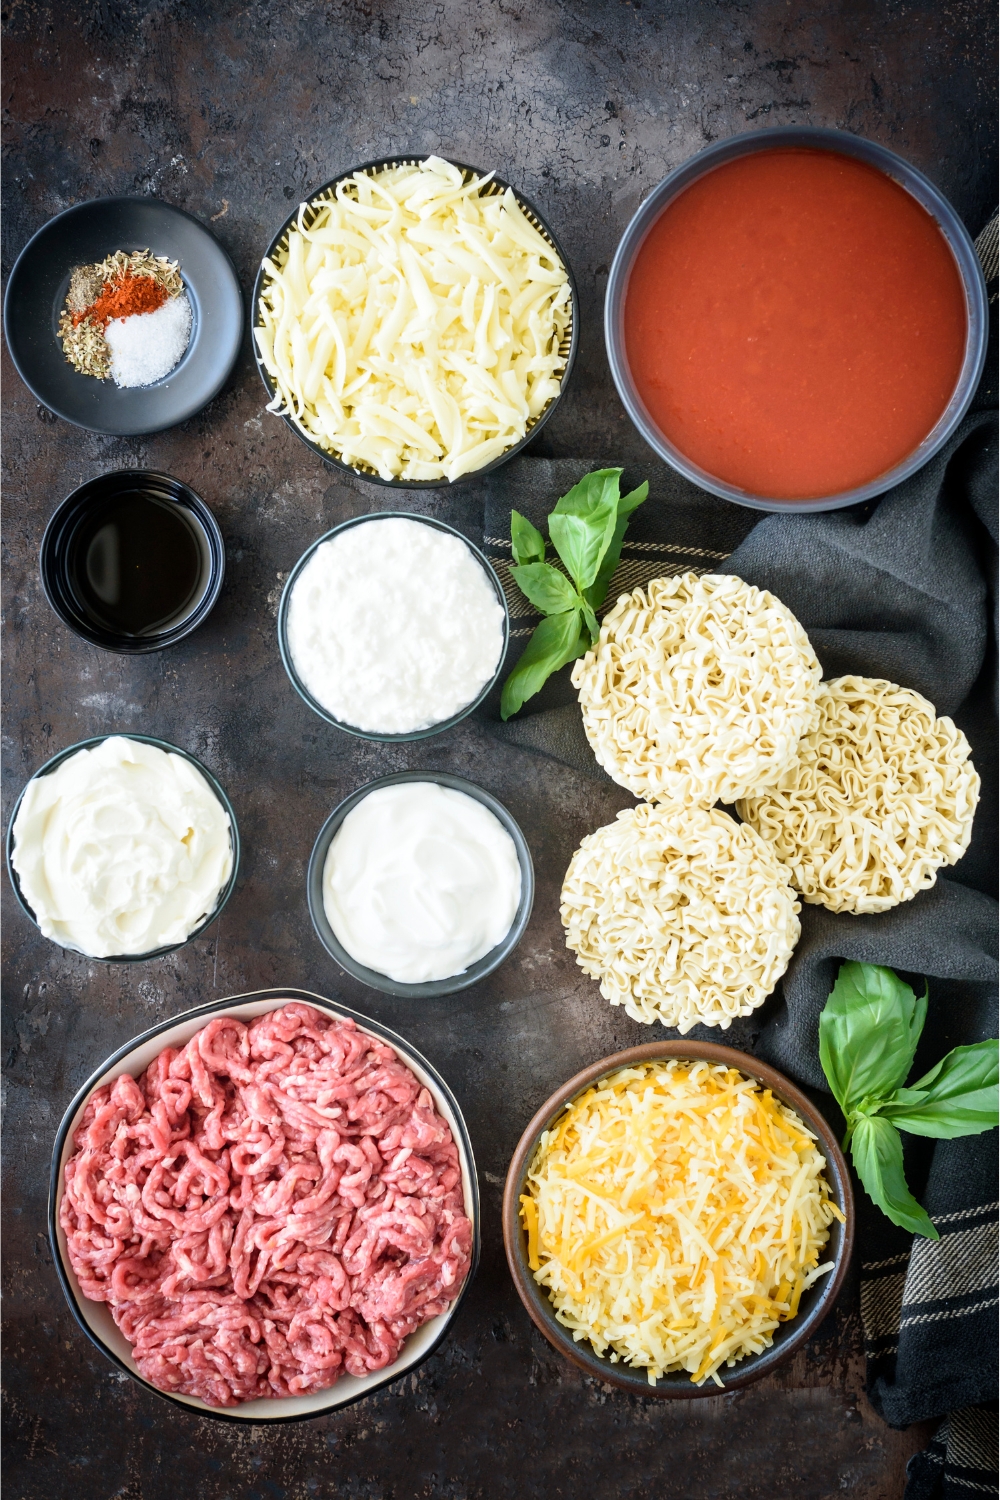 A bowl of mozzarella, a bowl of tomato soup,a bowl of cottage cheese, a bowl of yogurt, a bowl of beef, a bowl of mixed cheddar, and three bunches of egg noodles.